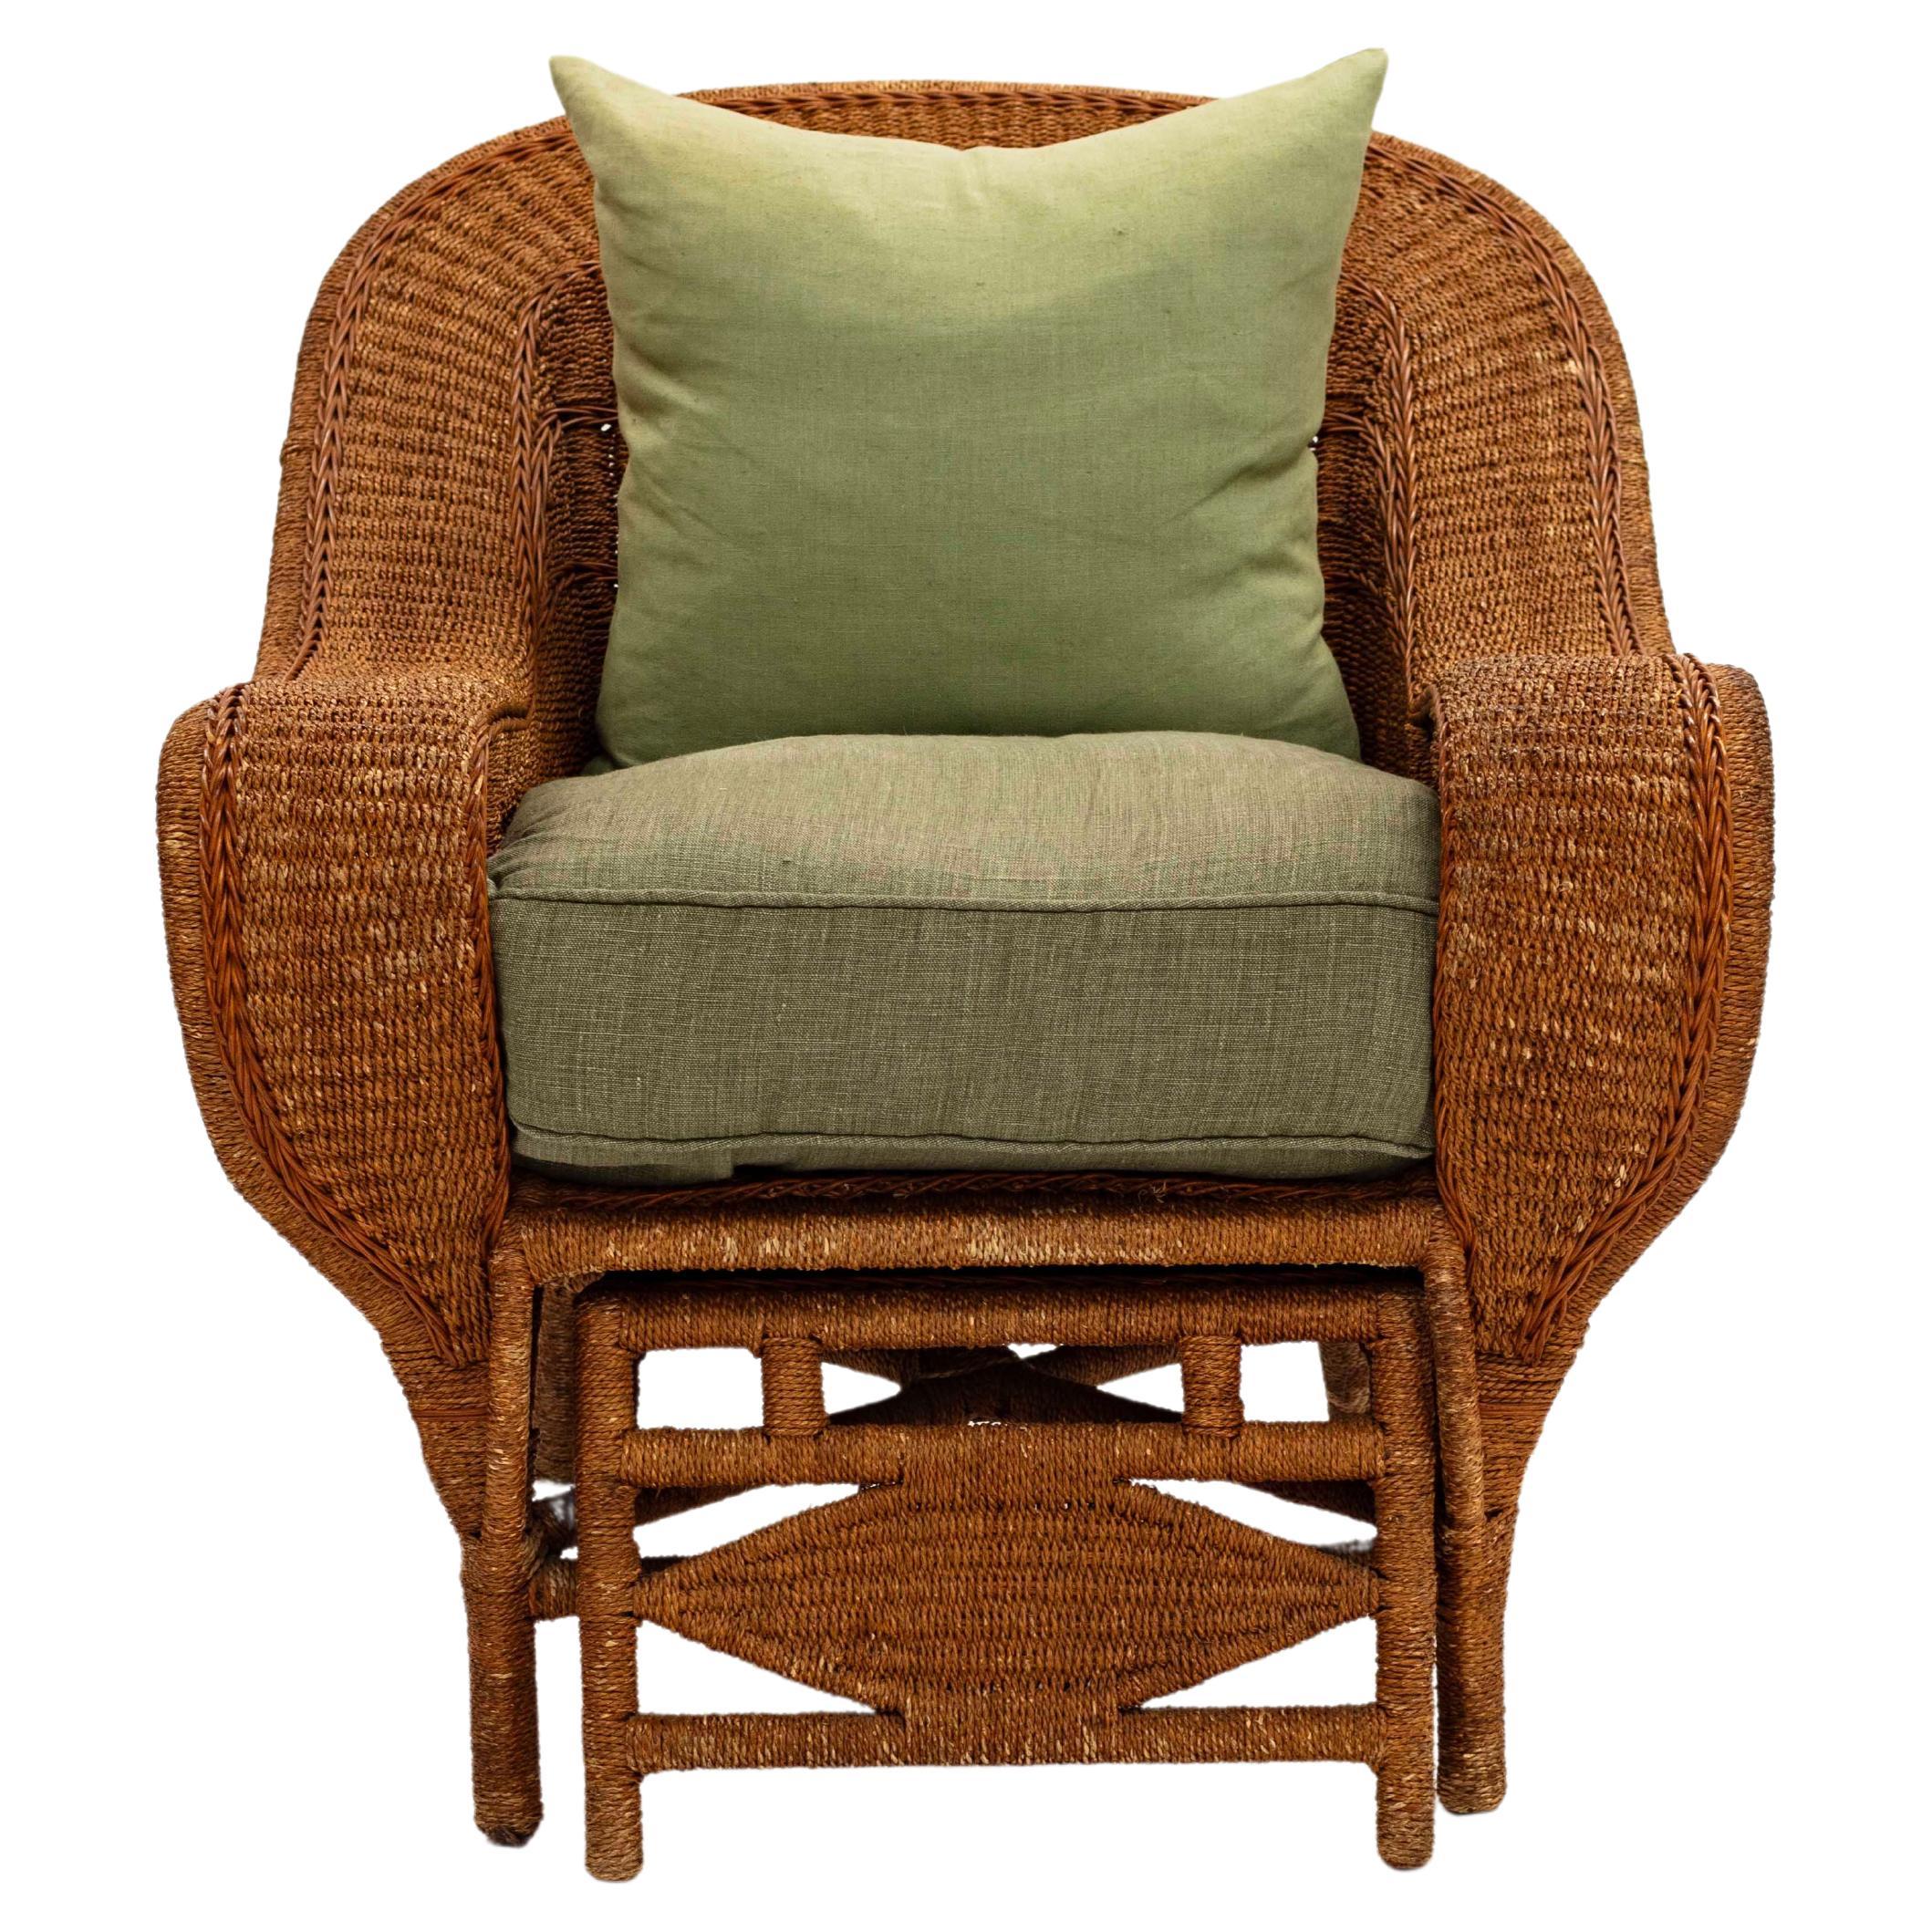 Woven Seagrass Large Chair and Ottoman For Sale